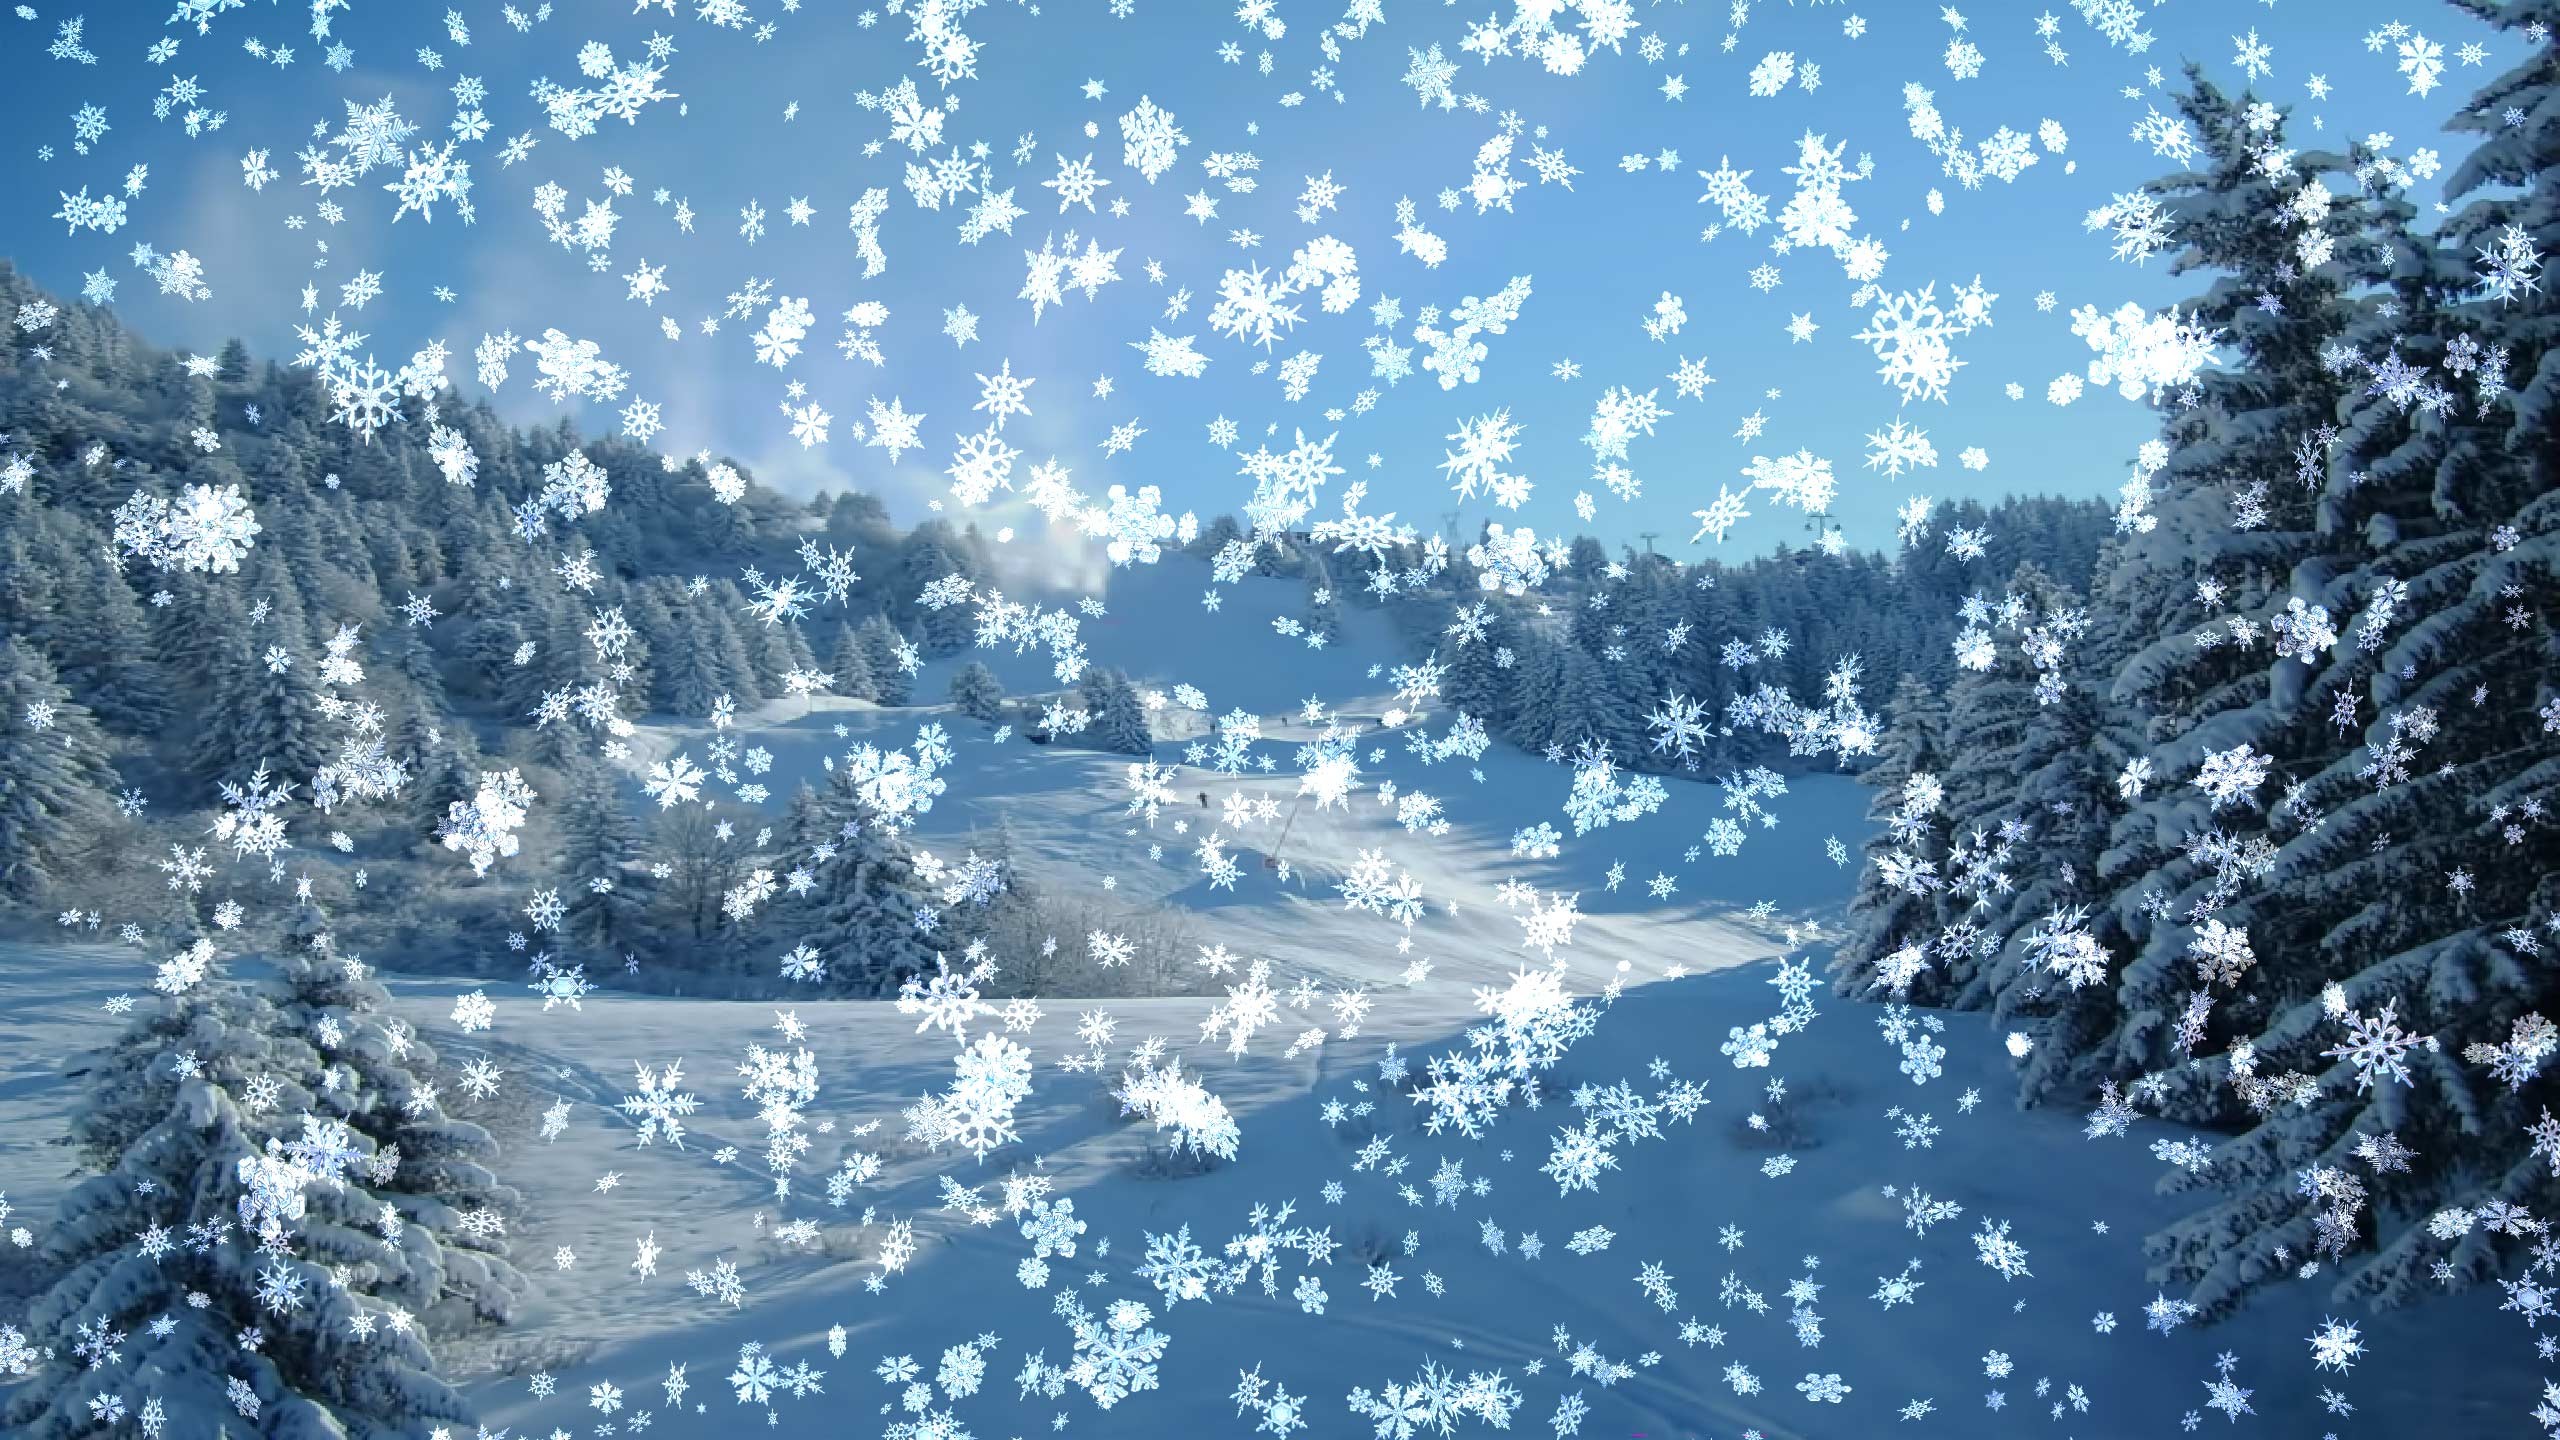 Live Snow Falling Wallpaper (54+ images)